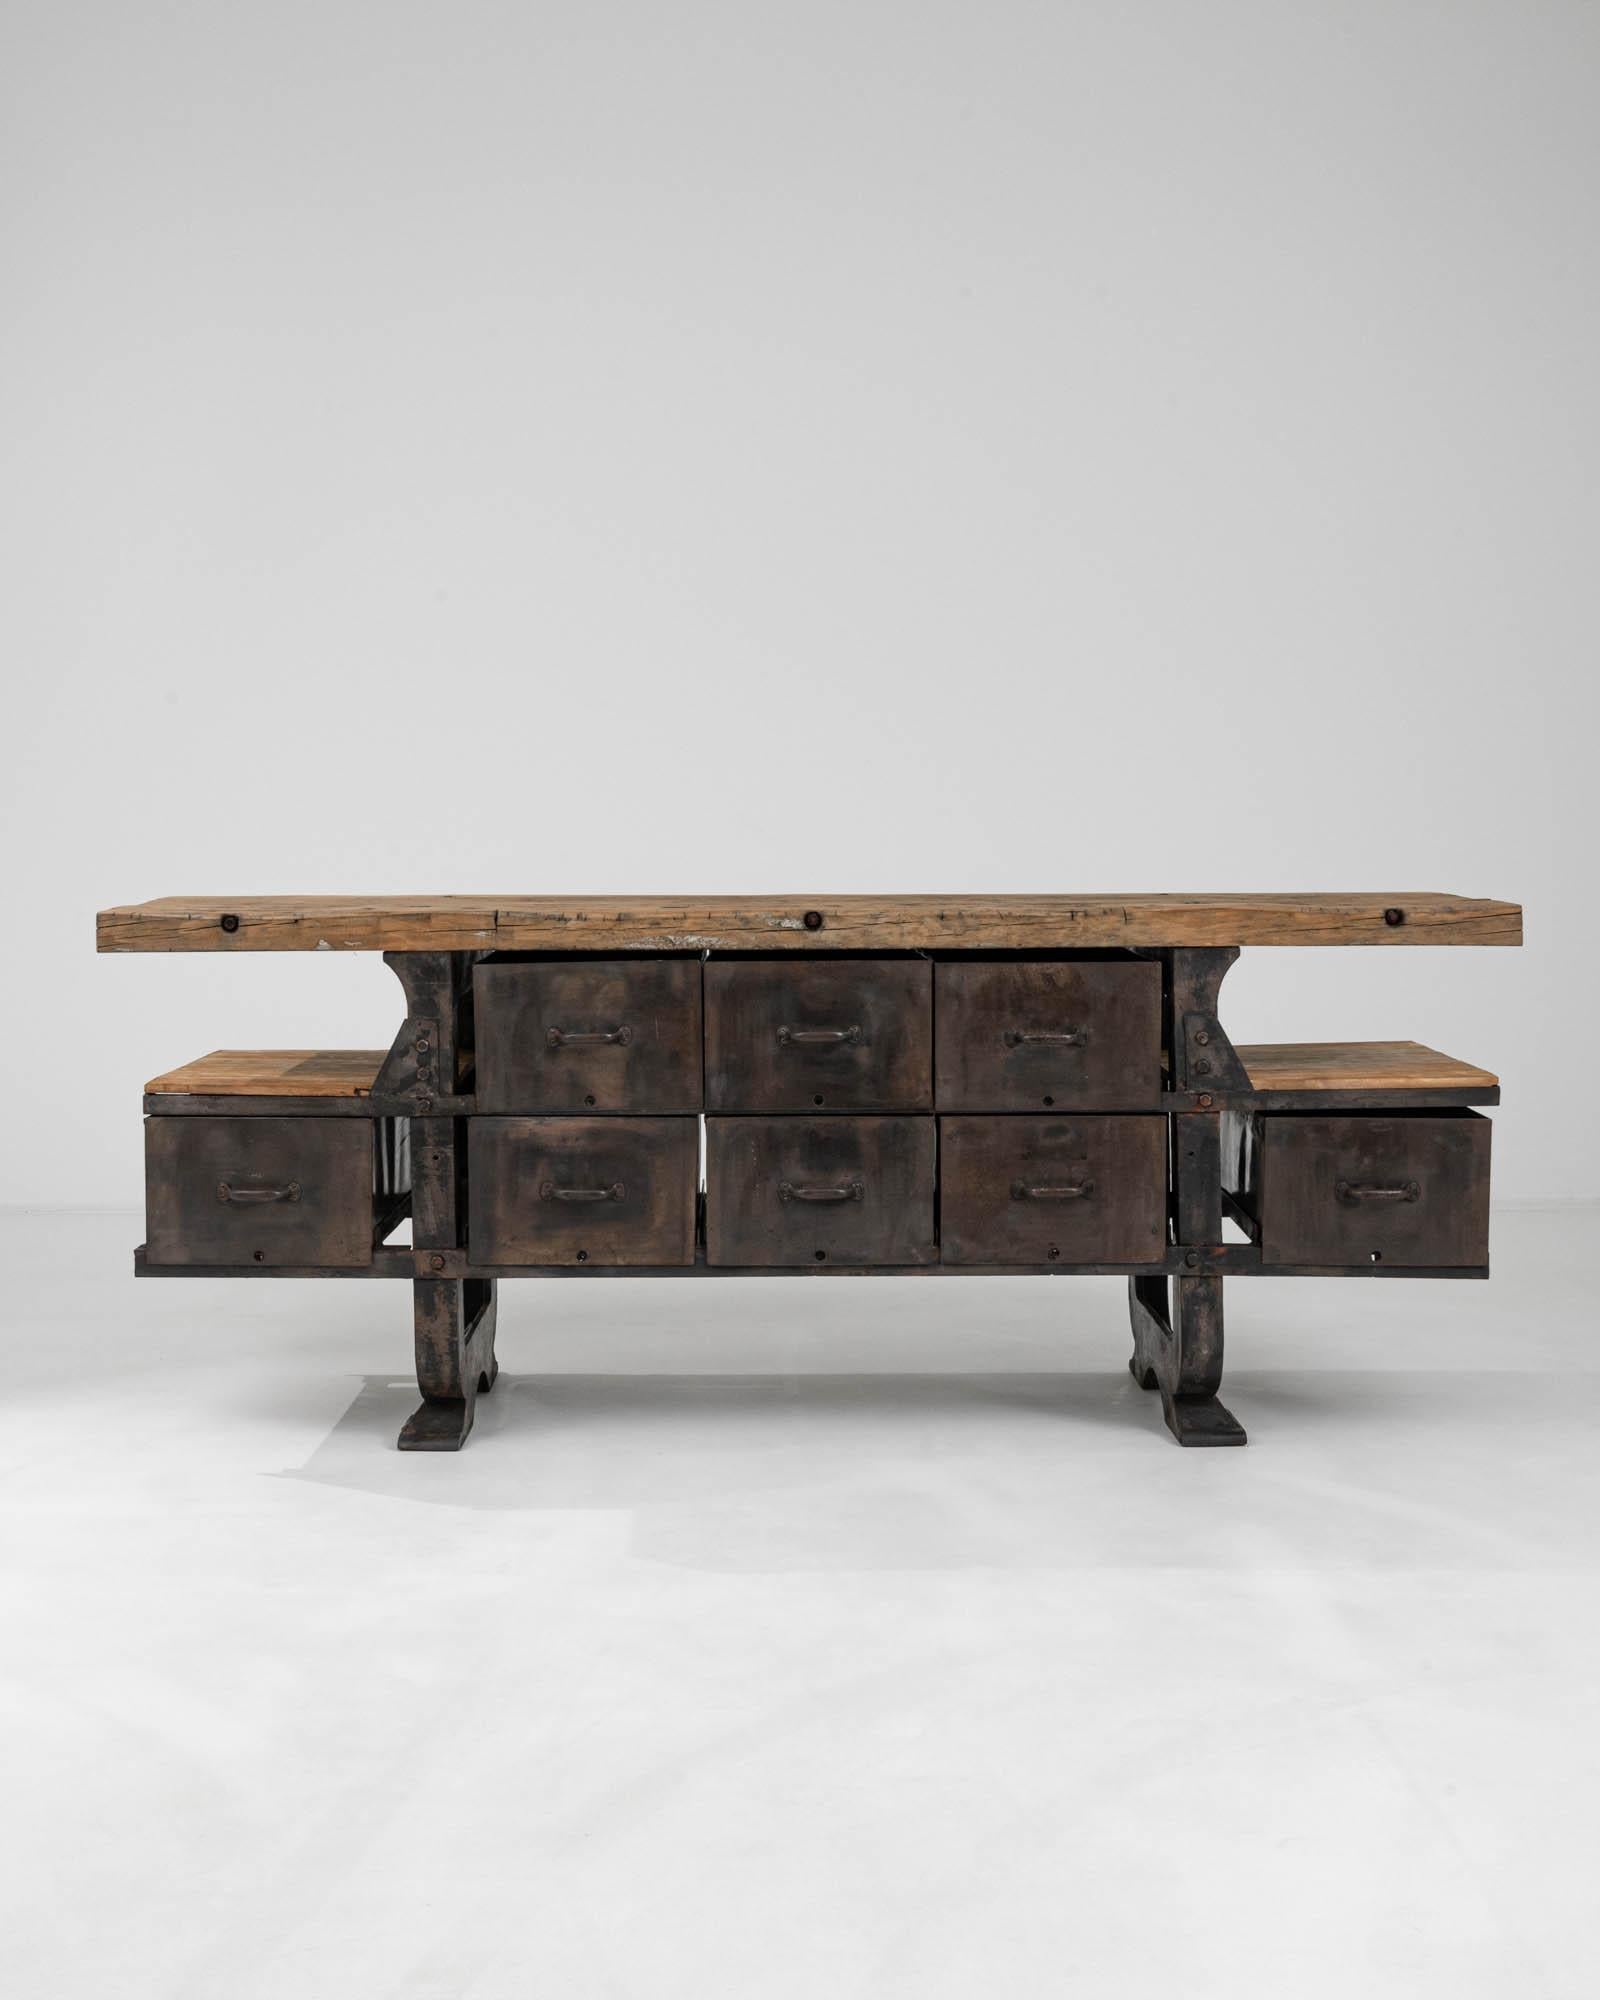 Introducing the 20th Century Belgian Industrial Table, a statement piece that blends rugged functionality with bold, architectural design. This substantial table features a robust wooden top that bears the rich patina of its industrial past,